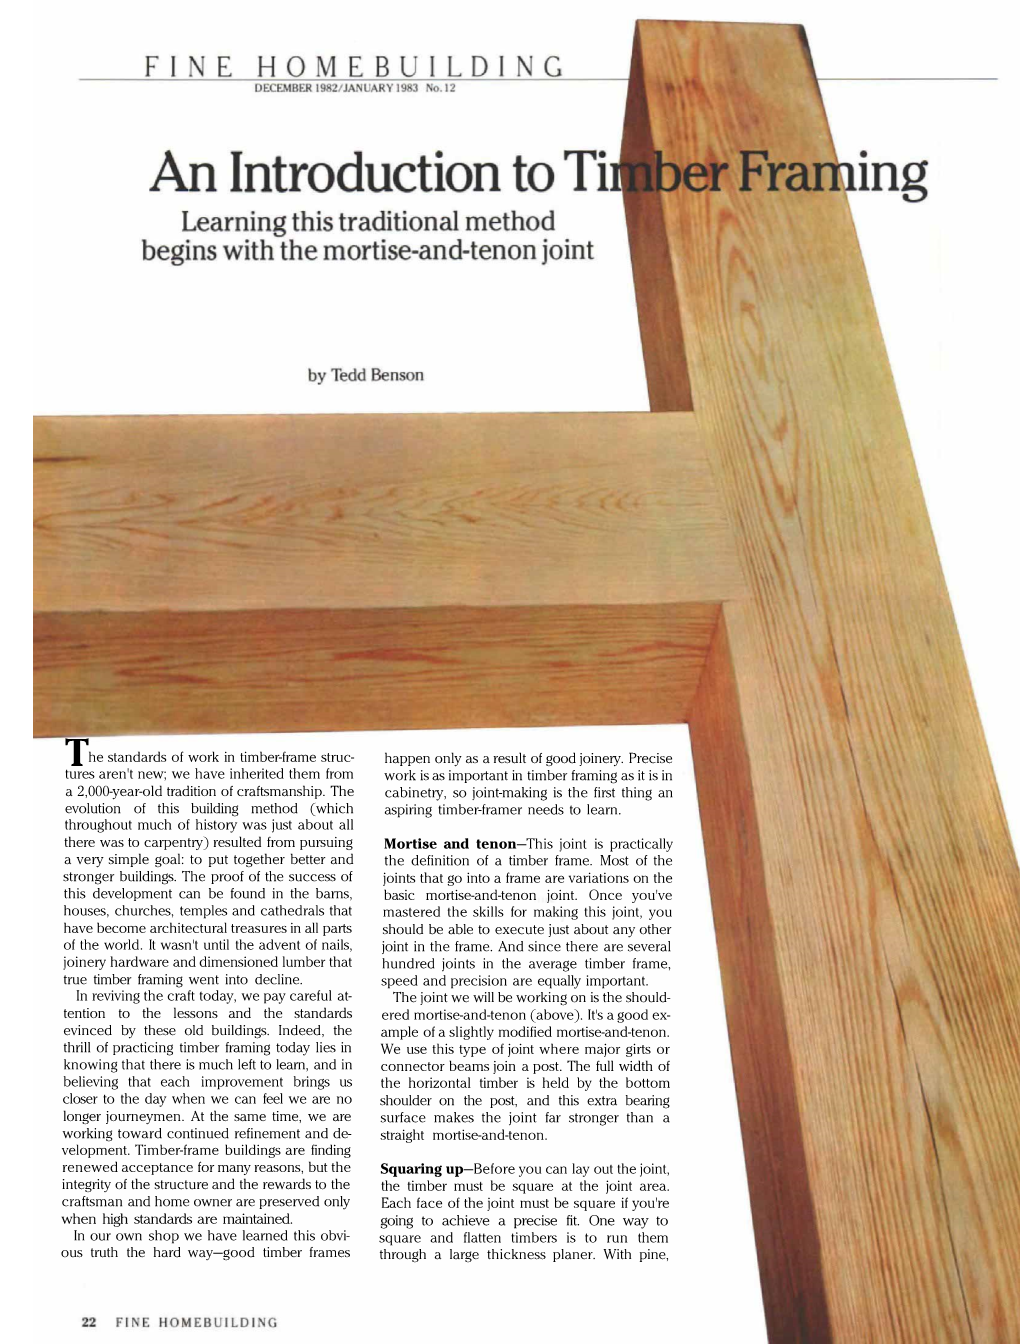 An Introduction to Timber Framing Learning This Traditional Method Begins with the Mortise-And-Tenon Joint